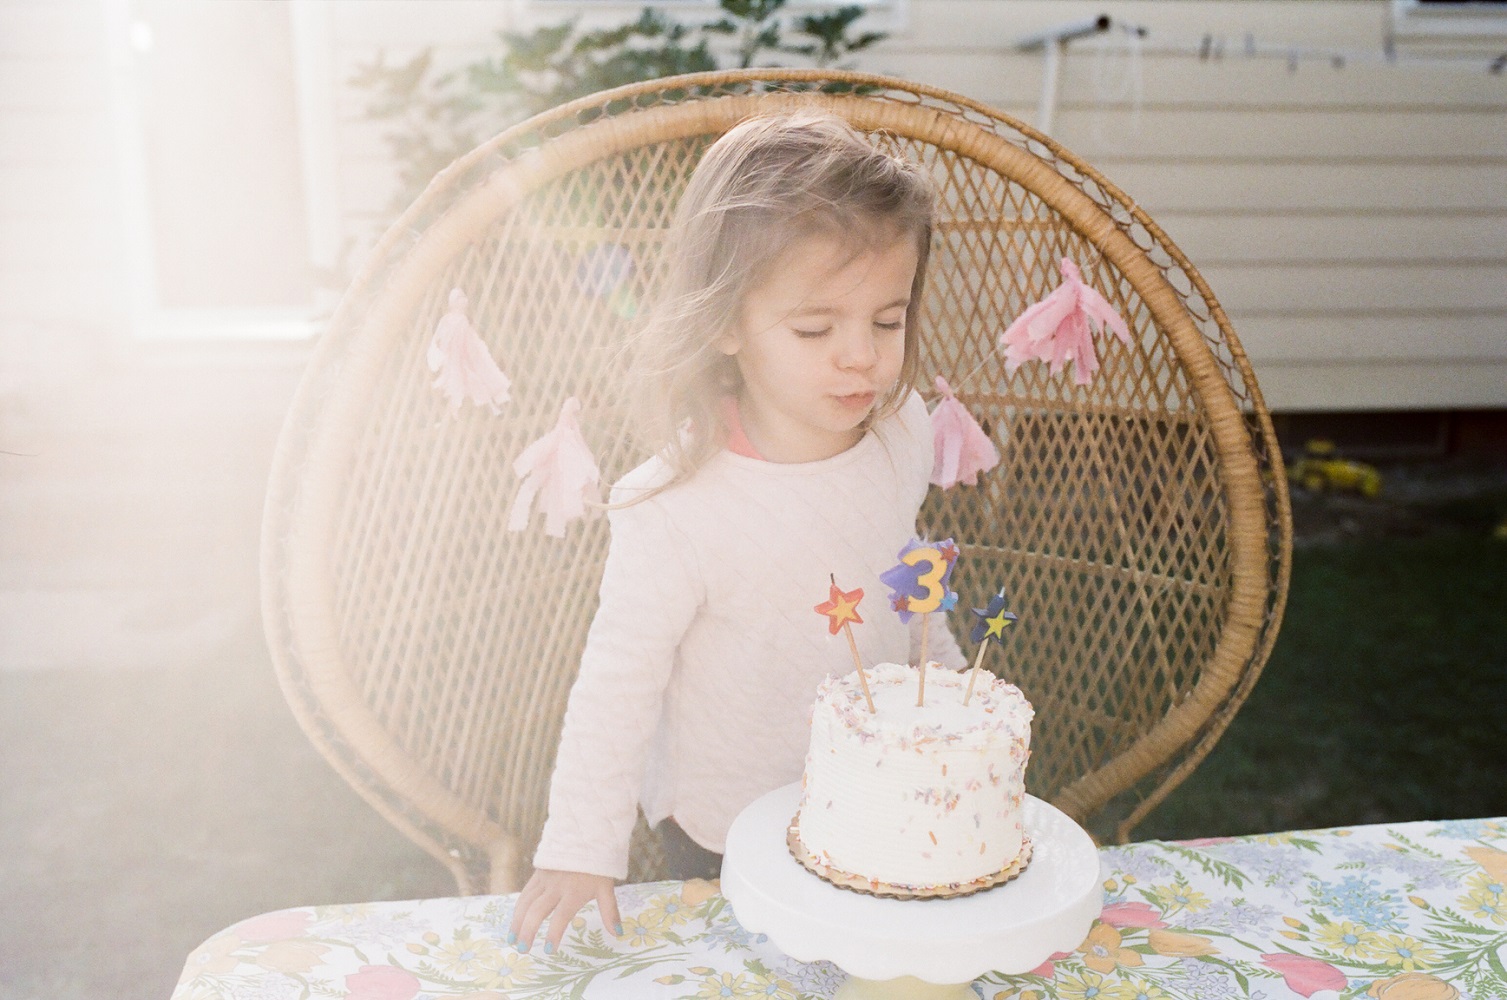 Happy birthday parties at home: celebrating in isolation